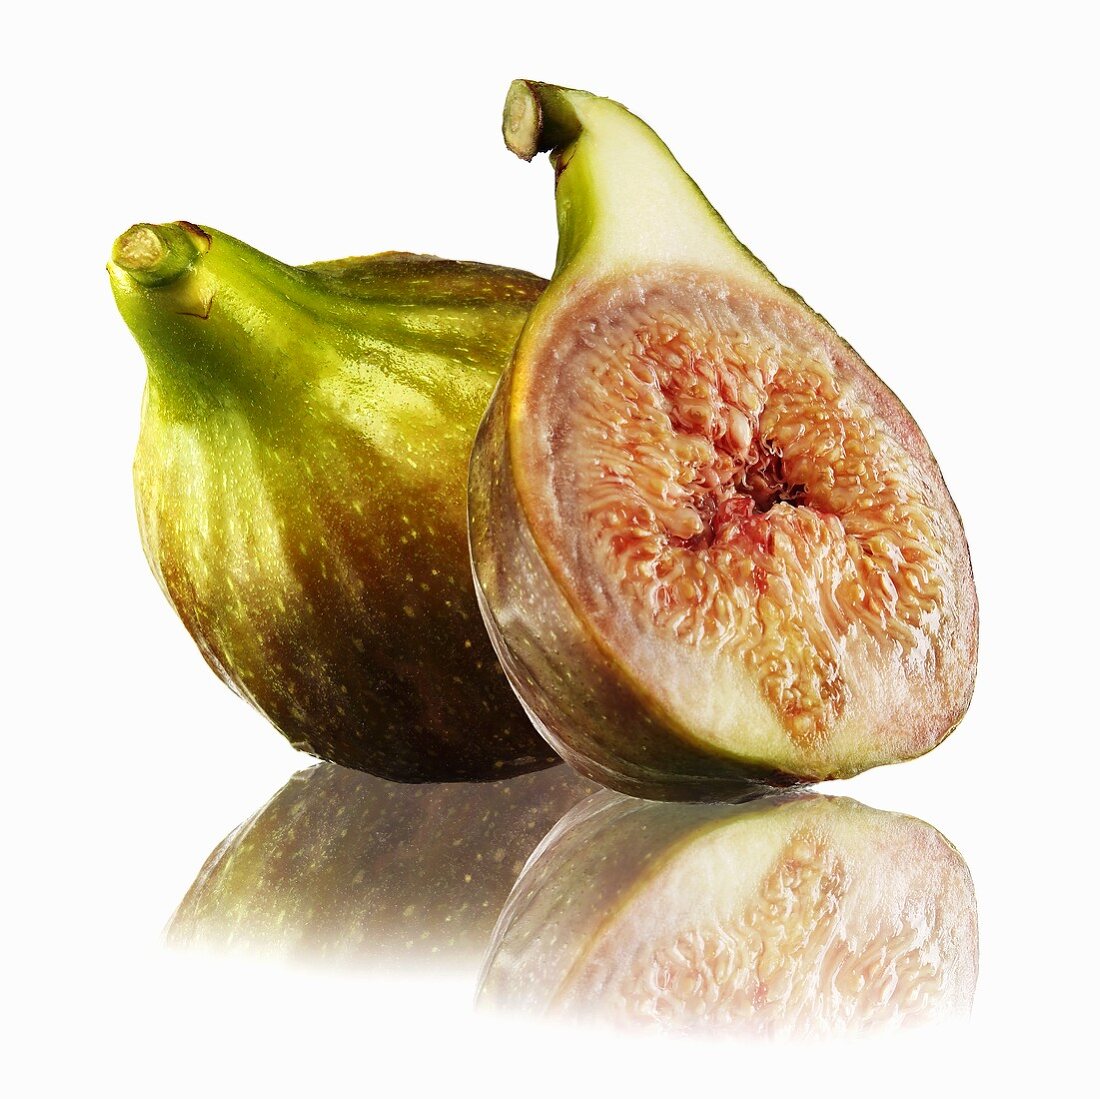 Whole fig and half a fig with reflection